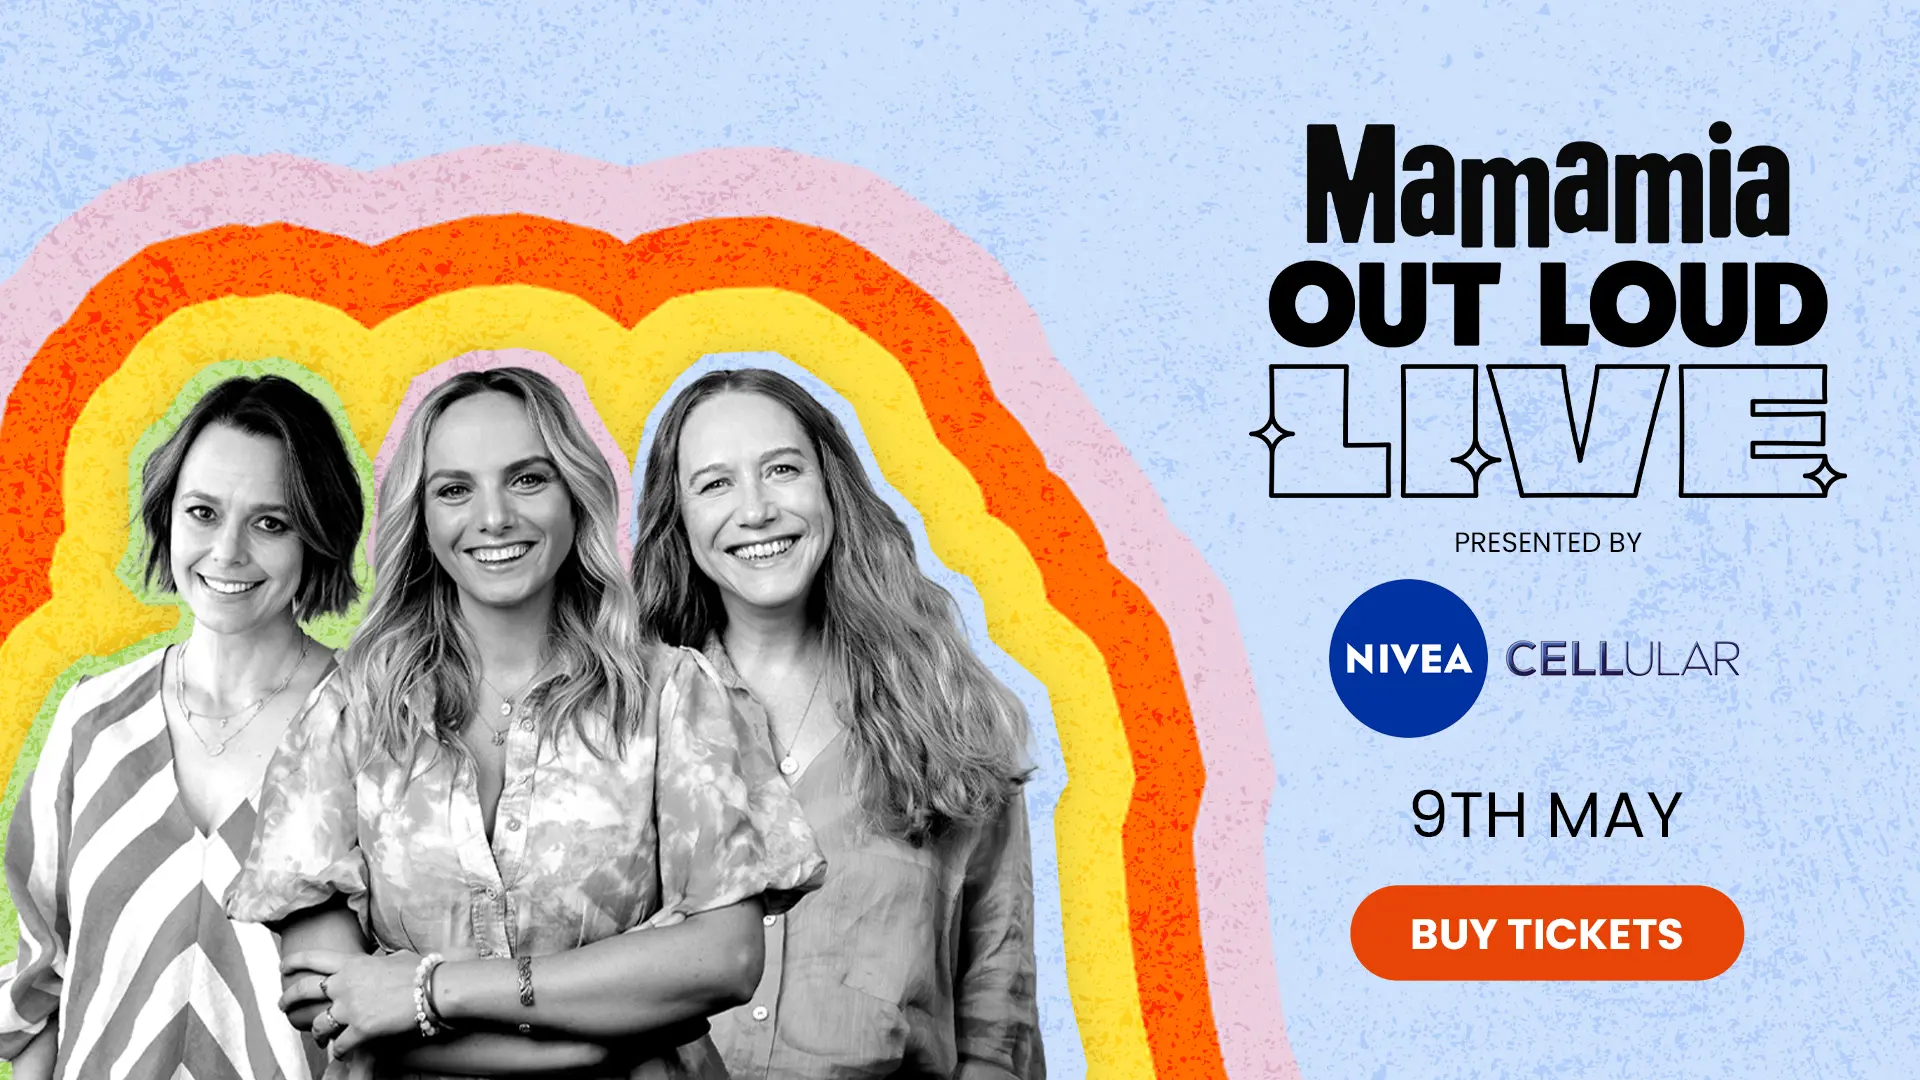 Mamamia Out Loud LIVE presented by NIVEA CELLULAR’